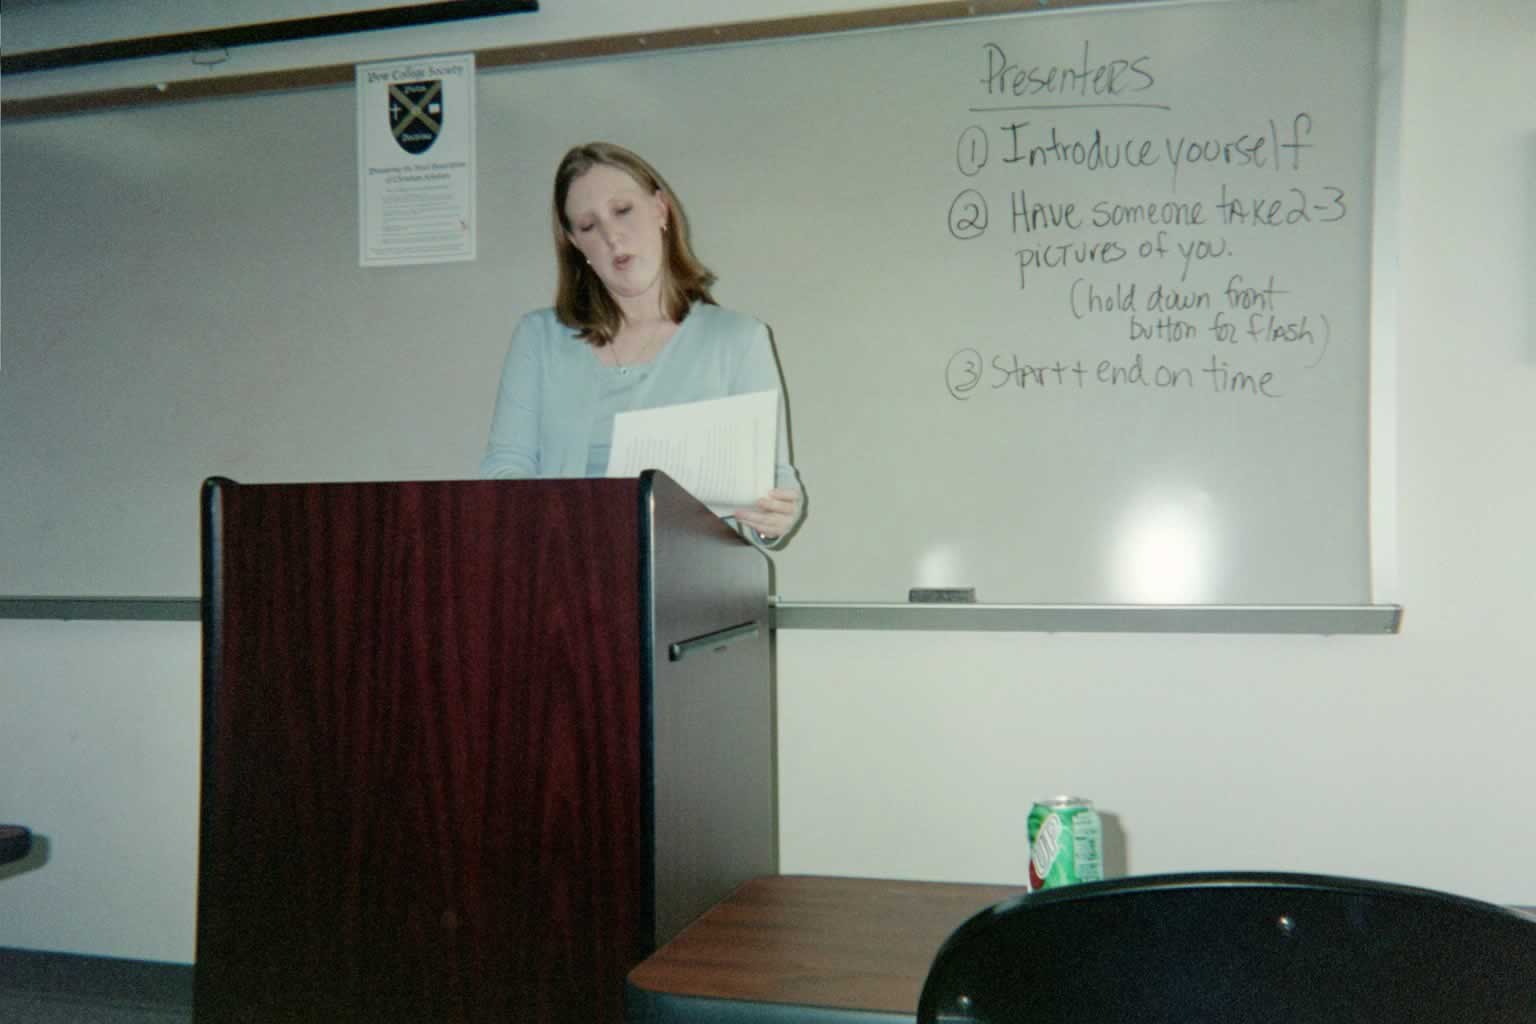 picture of a woman standing behind a podium looking at a piece of paper